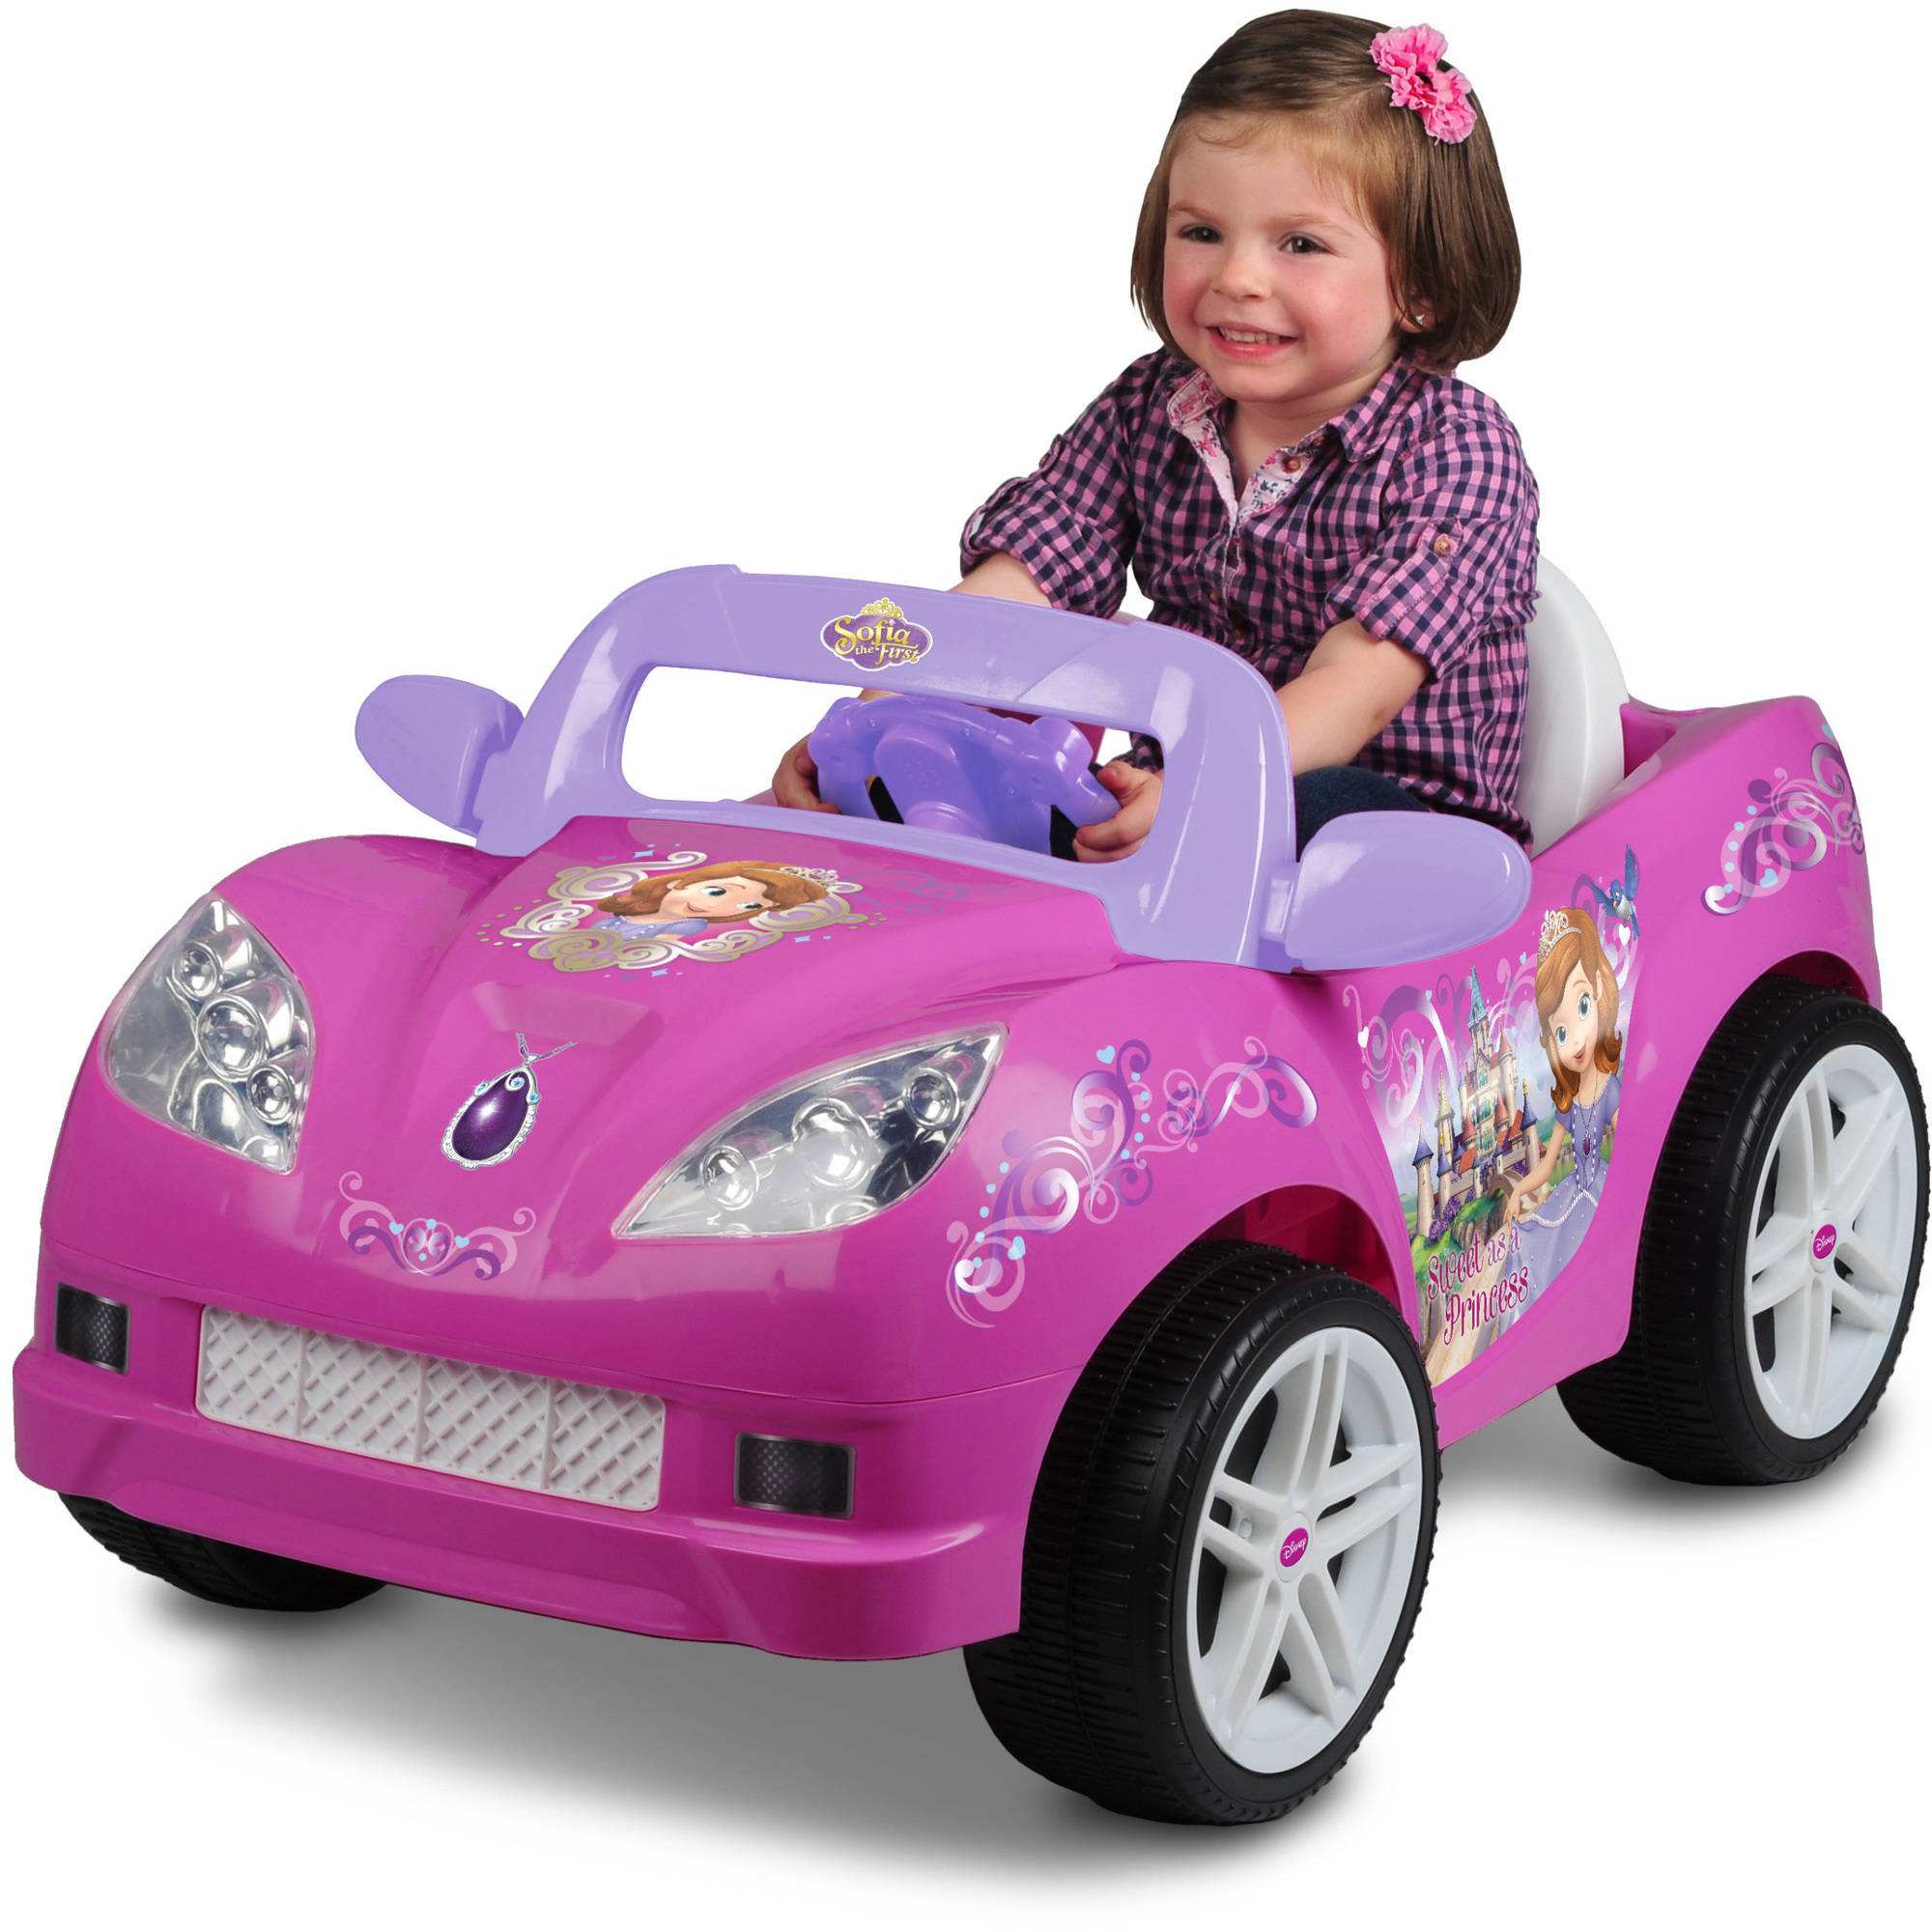 Disney Sofia the First Convertible Car 6-Volt Battery-Powered Ride-On - image 1 of 6